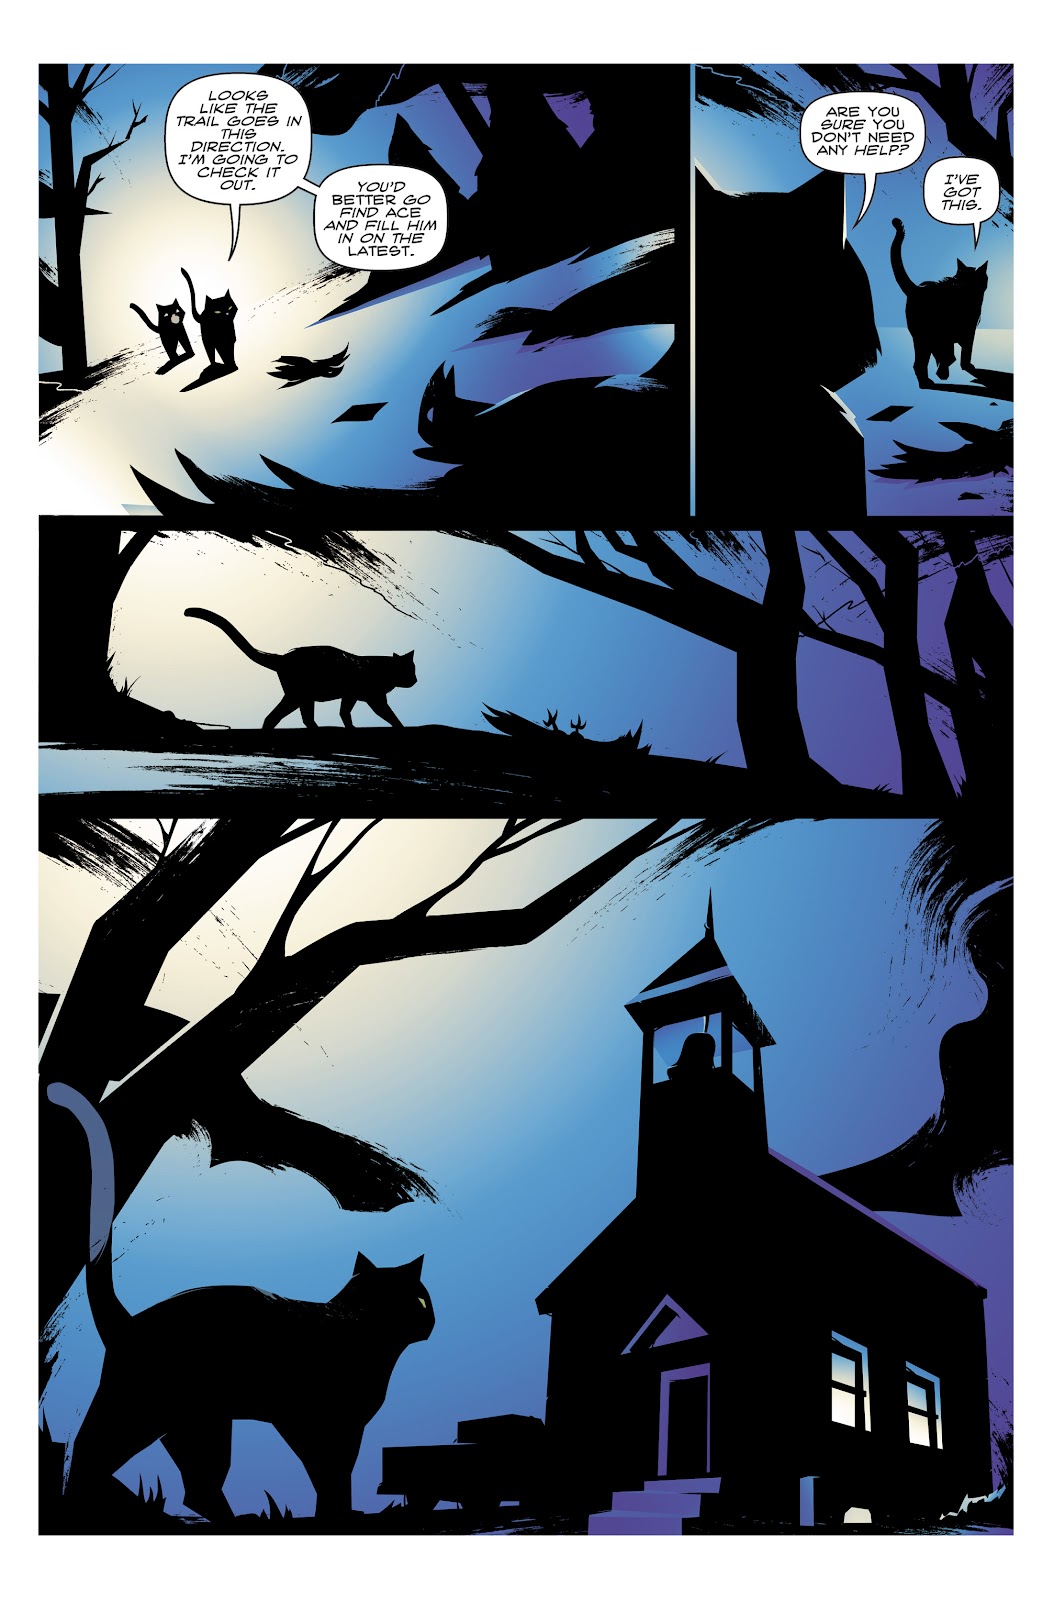 Hero Cats: Midnight Over Stellar City Vol. 2 issue 1 - Page 14